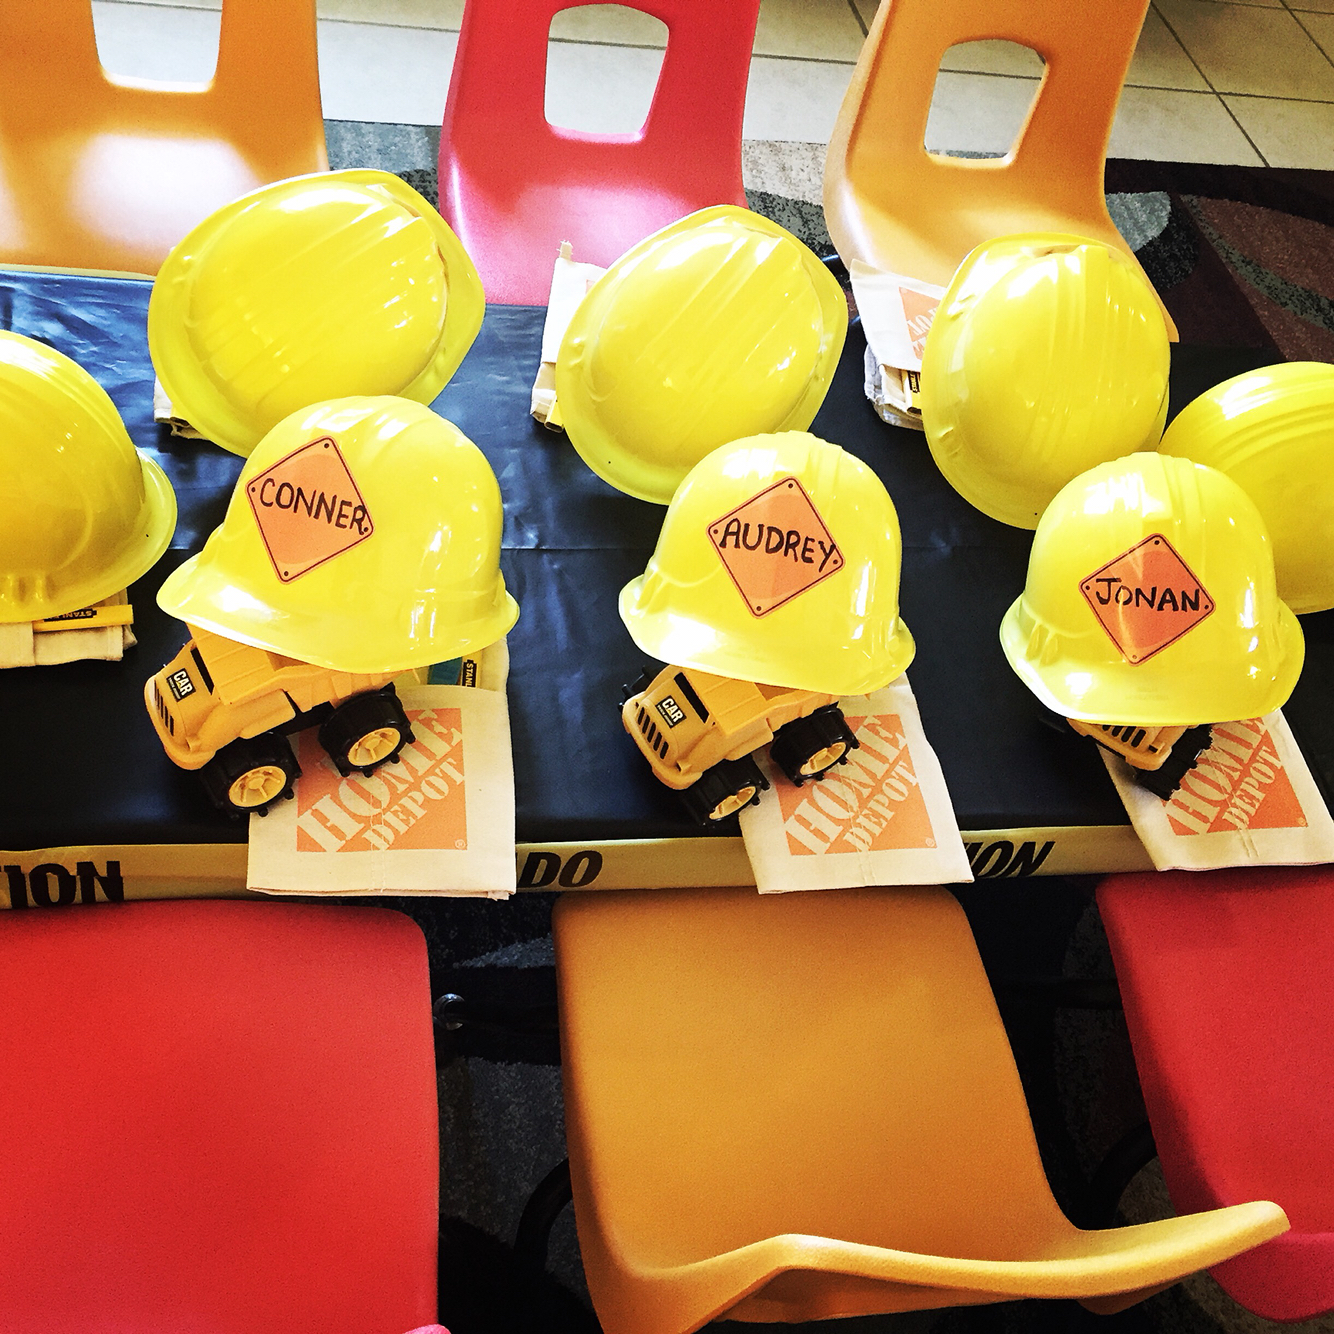 Construction themed goodie bags